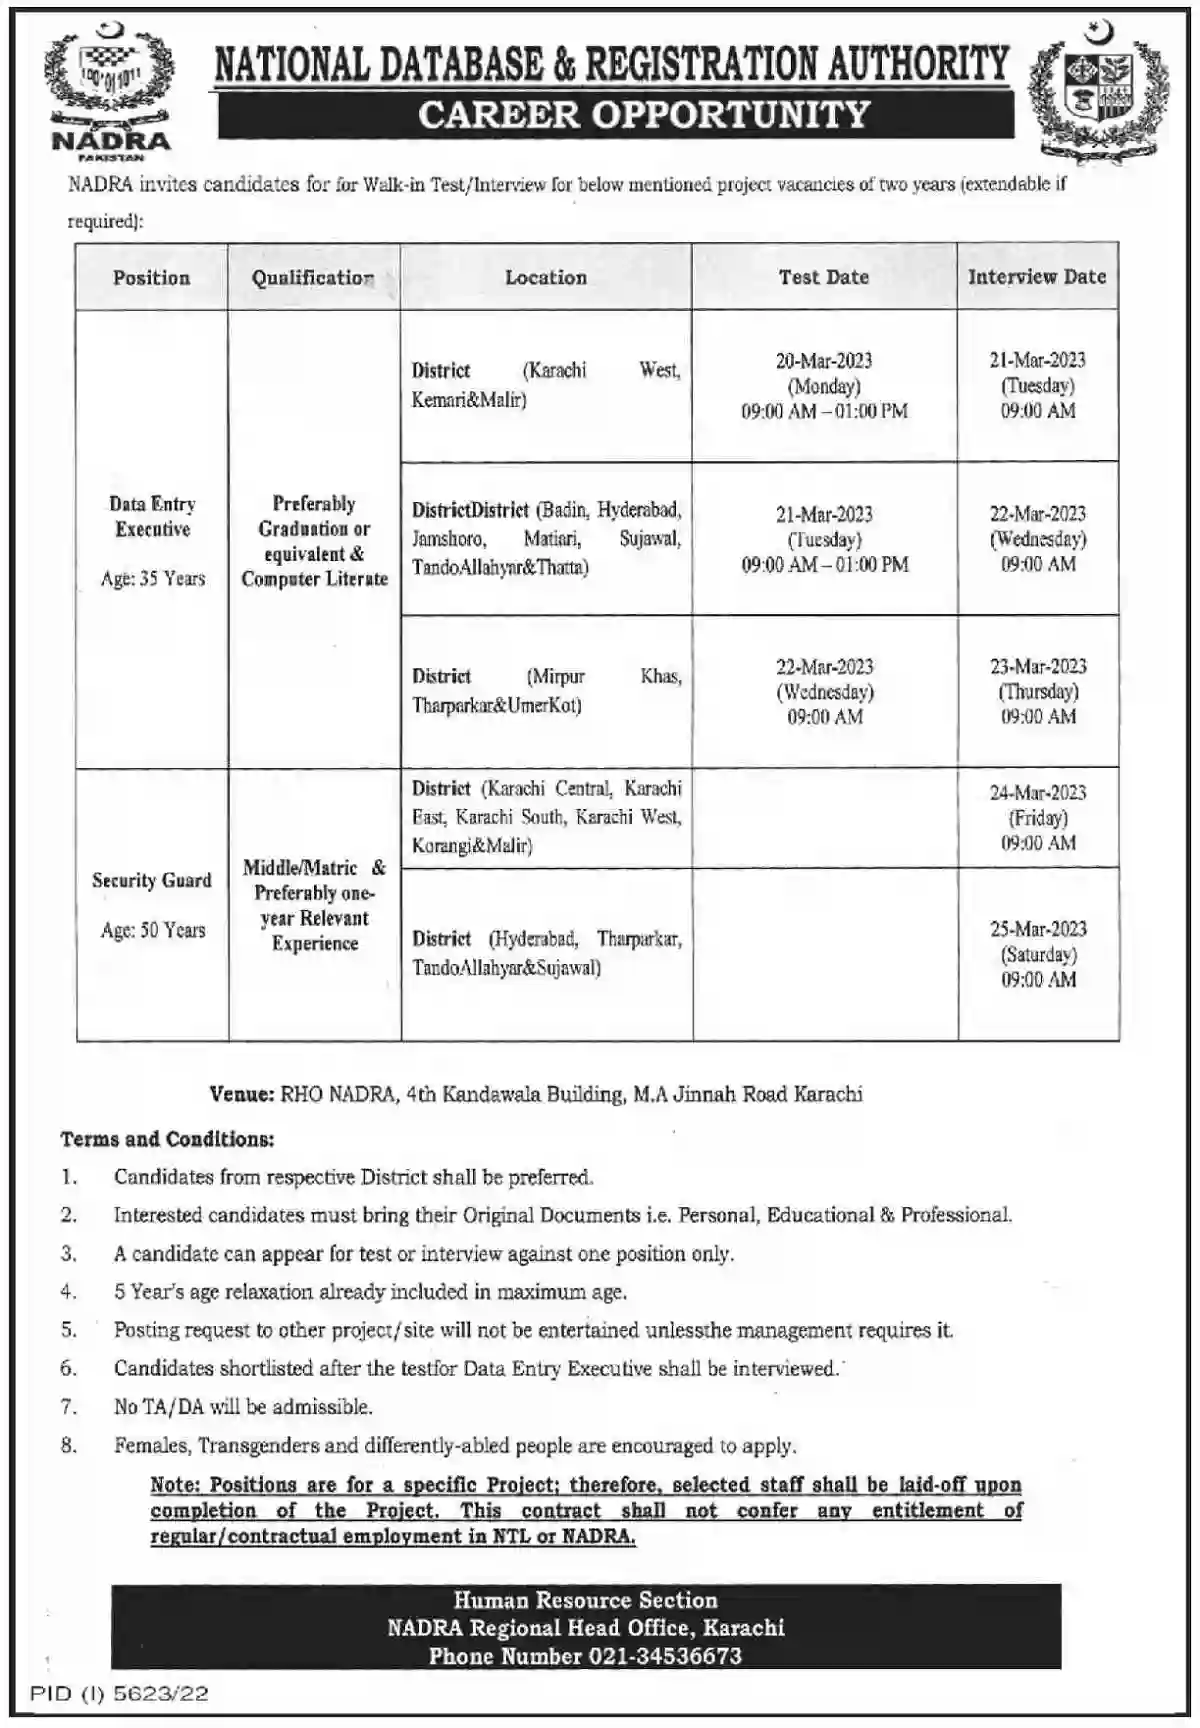 Government Of Pakistan Nadra Jobs 2023 Karachi Walk-In Interviews For Data Entry Executive And Security Guard Positions